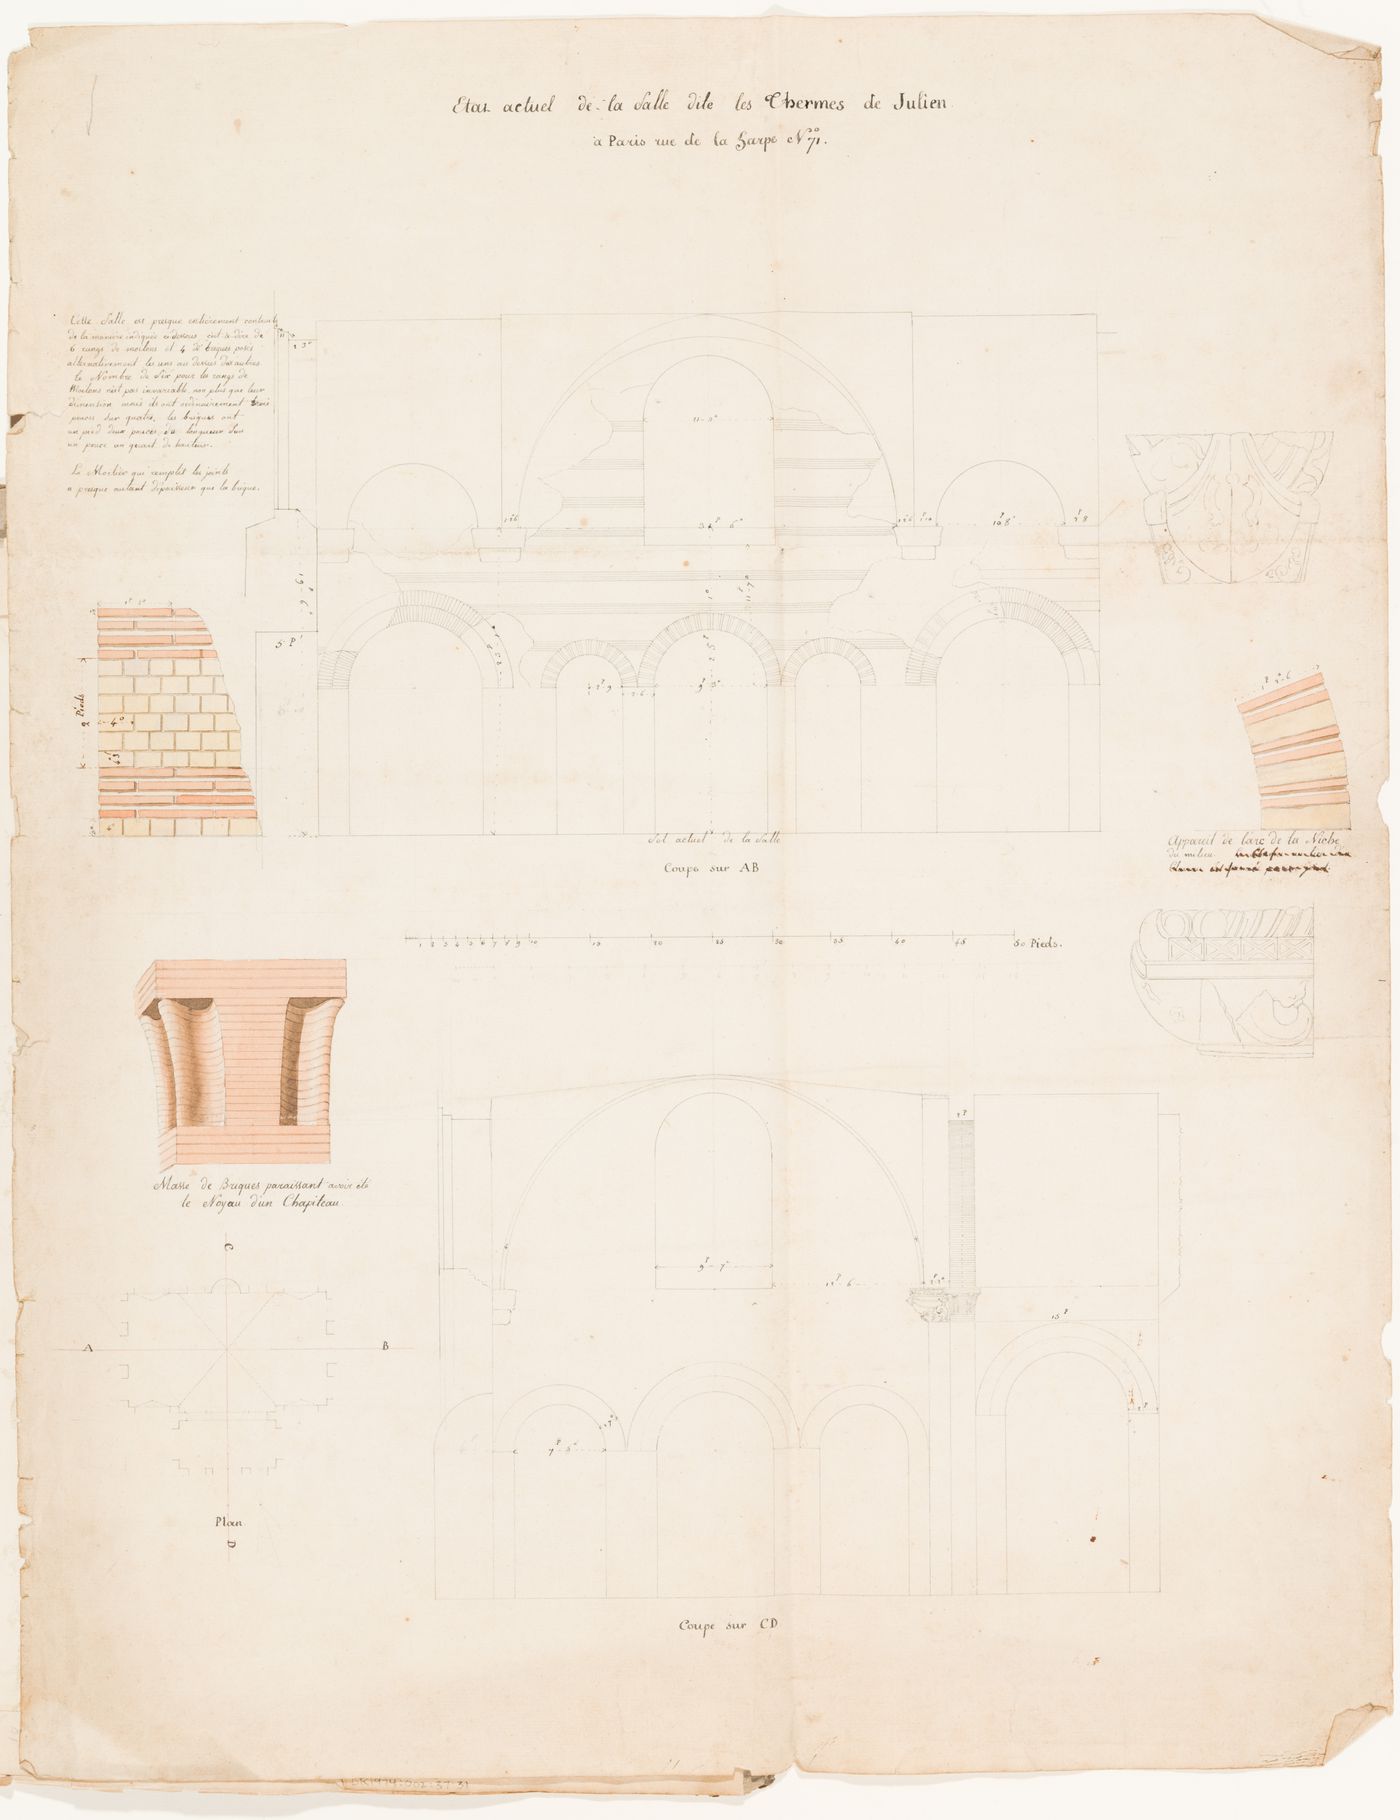 Plan, sections and construction details of the central chamber of the Thermes de Julien